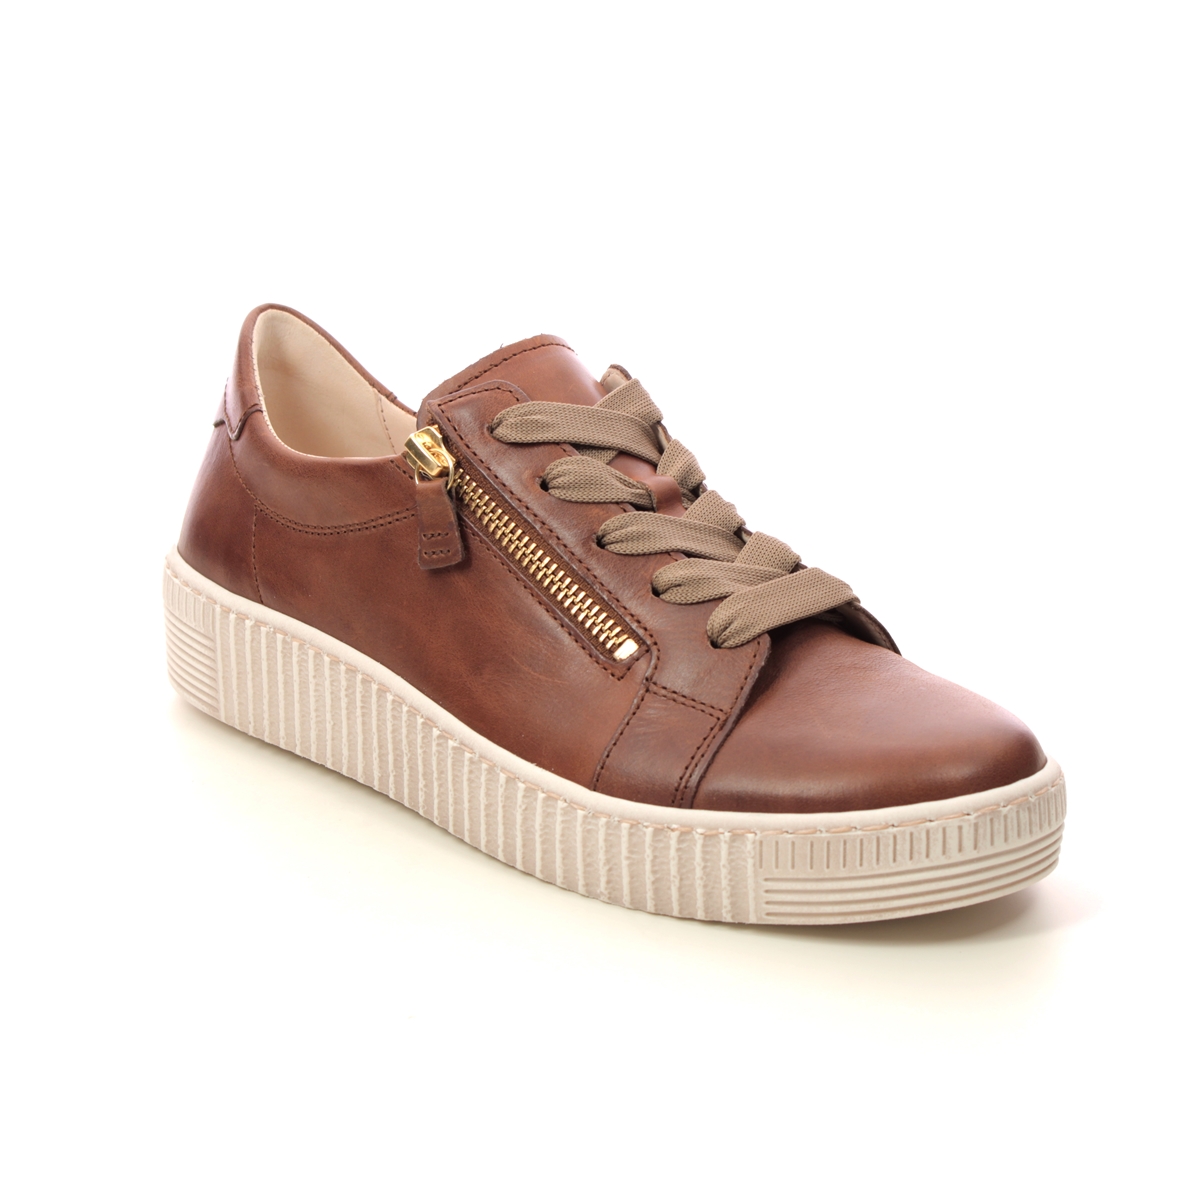 Gabor Wisdom Tan Leather Womens Trainers 93.334.24 In Size 5.5 In Plain Tan Leather  Womens Trainers In Soft Tan Leather Leather